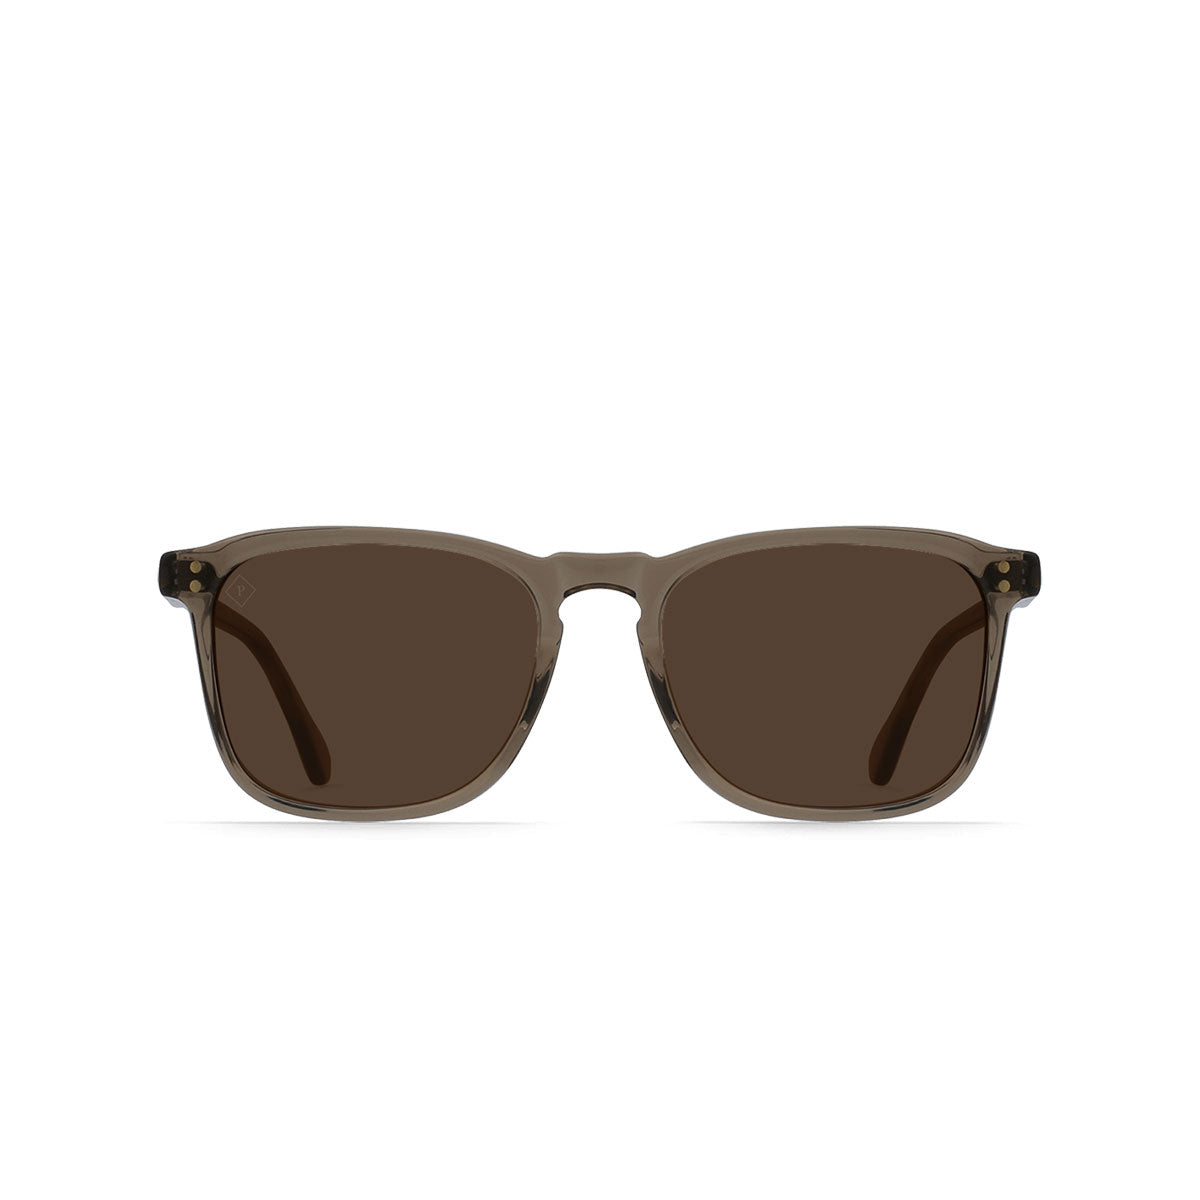 RAEN WILEY POLARIZED - GHOST / VIBRANT BROWN